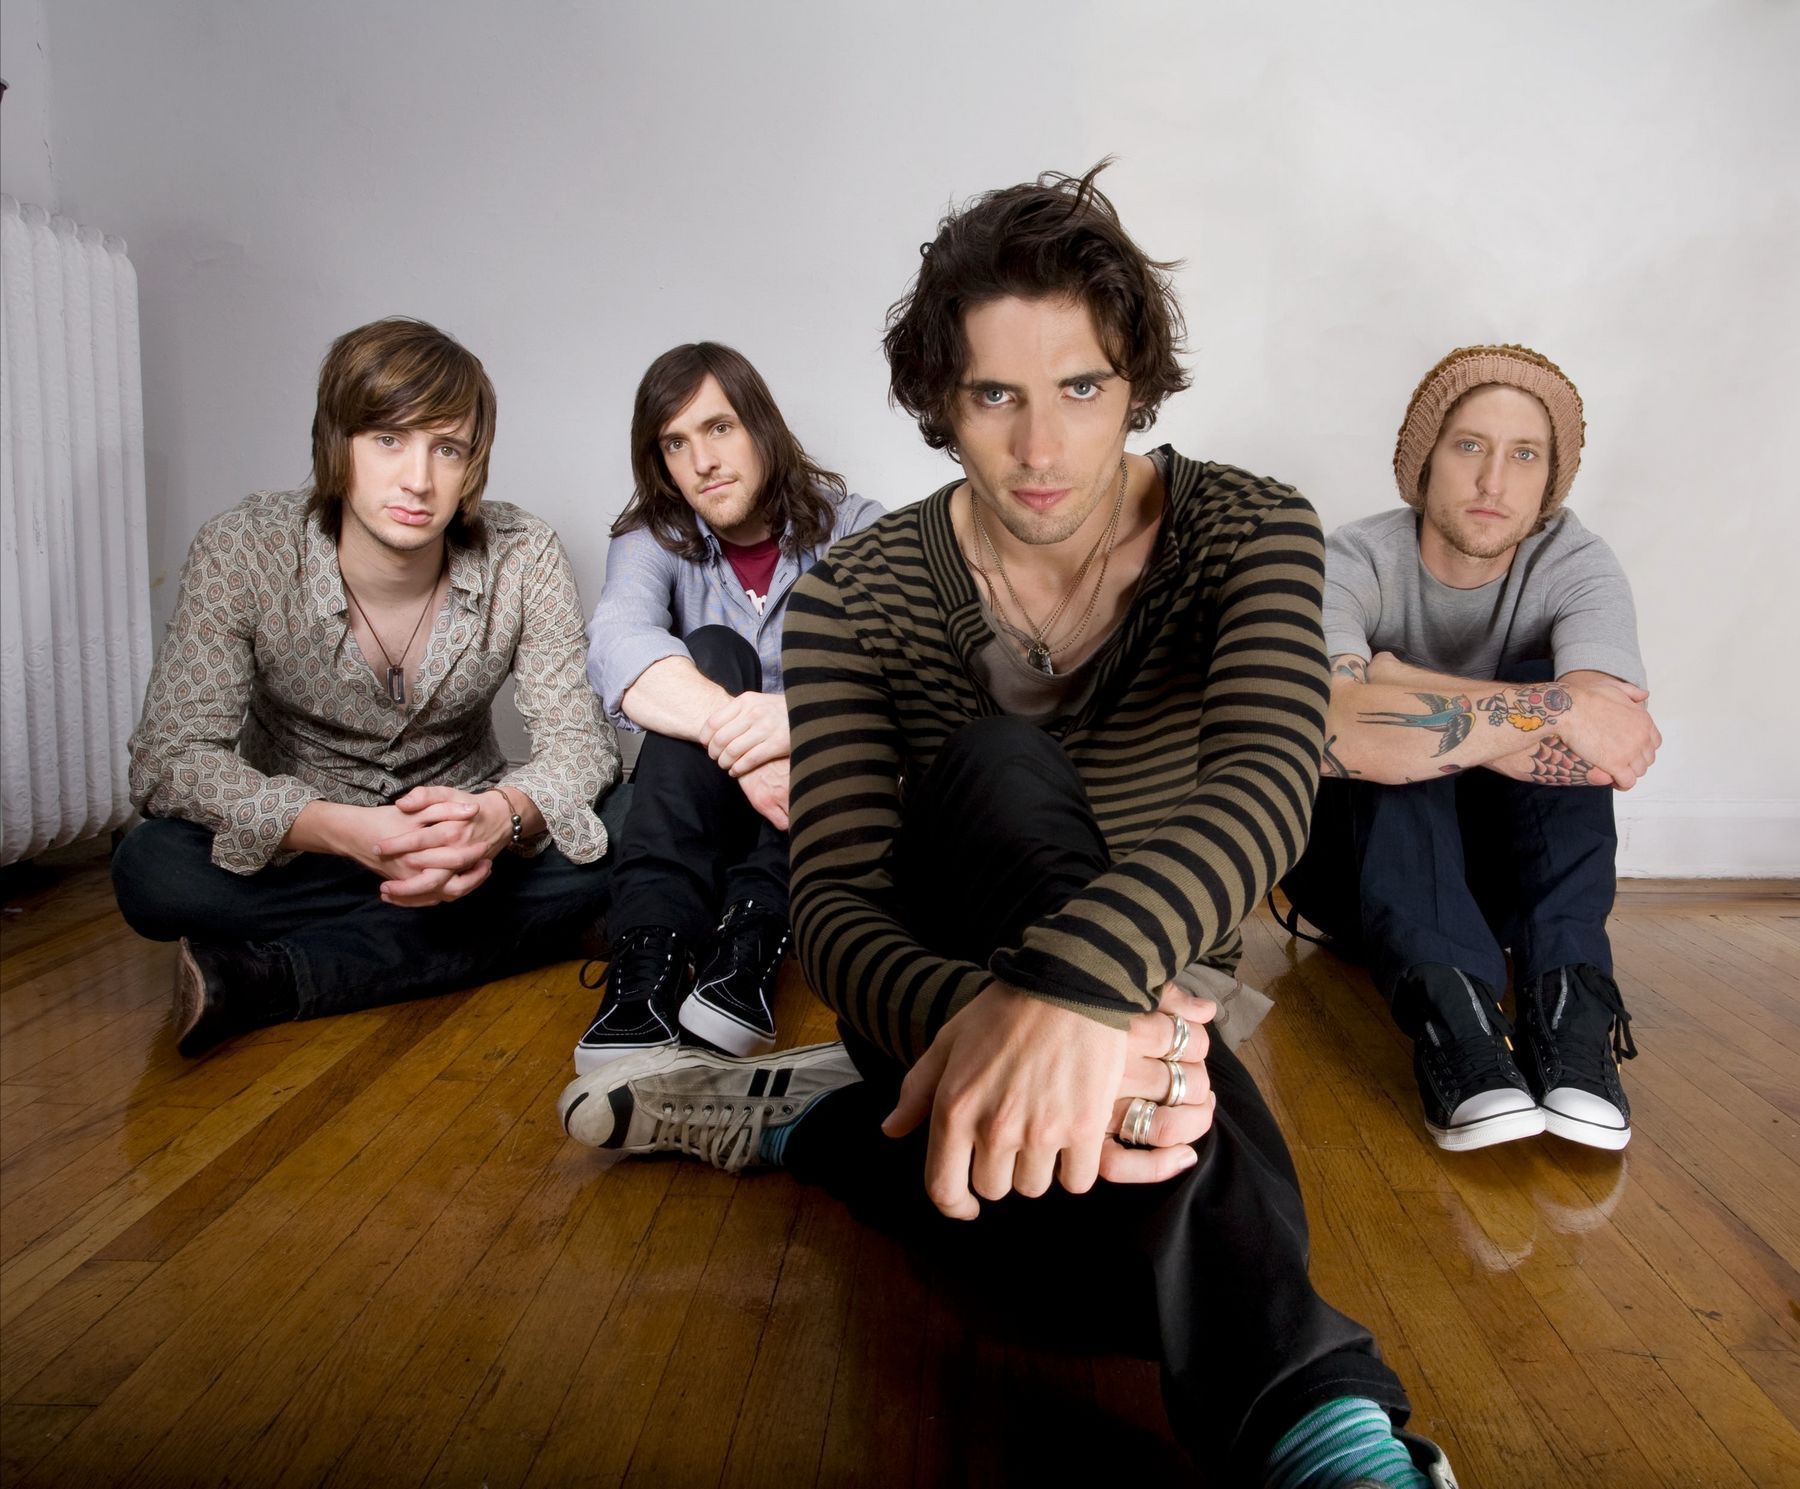 All American Rejects Wallpaper.. all american rejects wallpaper 310 category the all american rejects. All american rejects, American, Rejected wallpaper